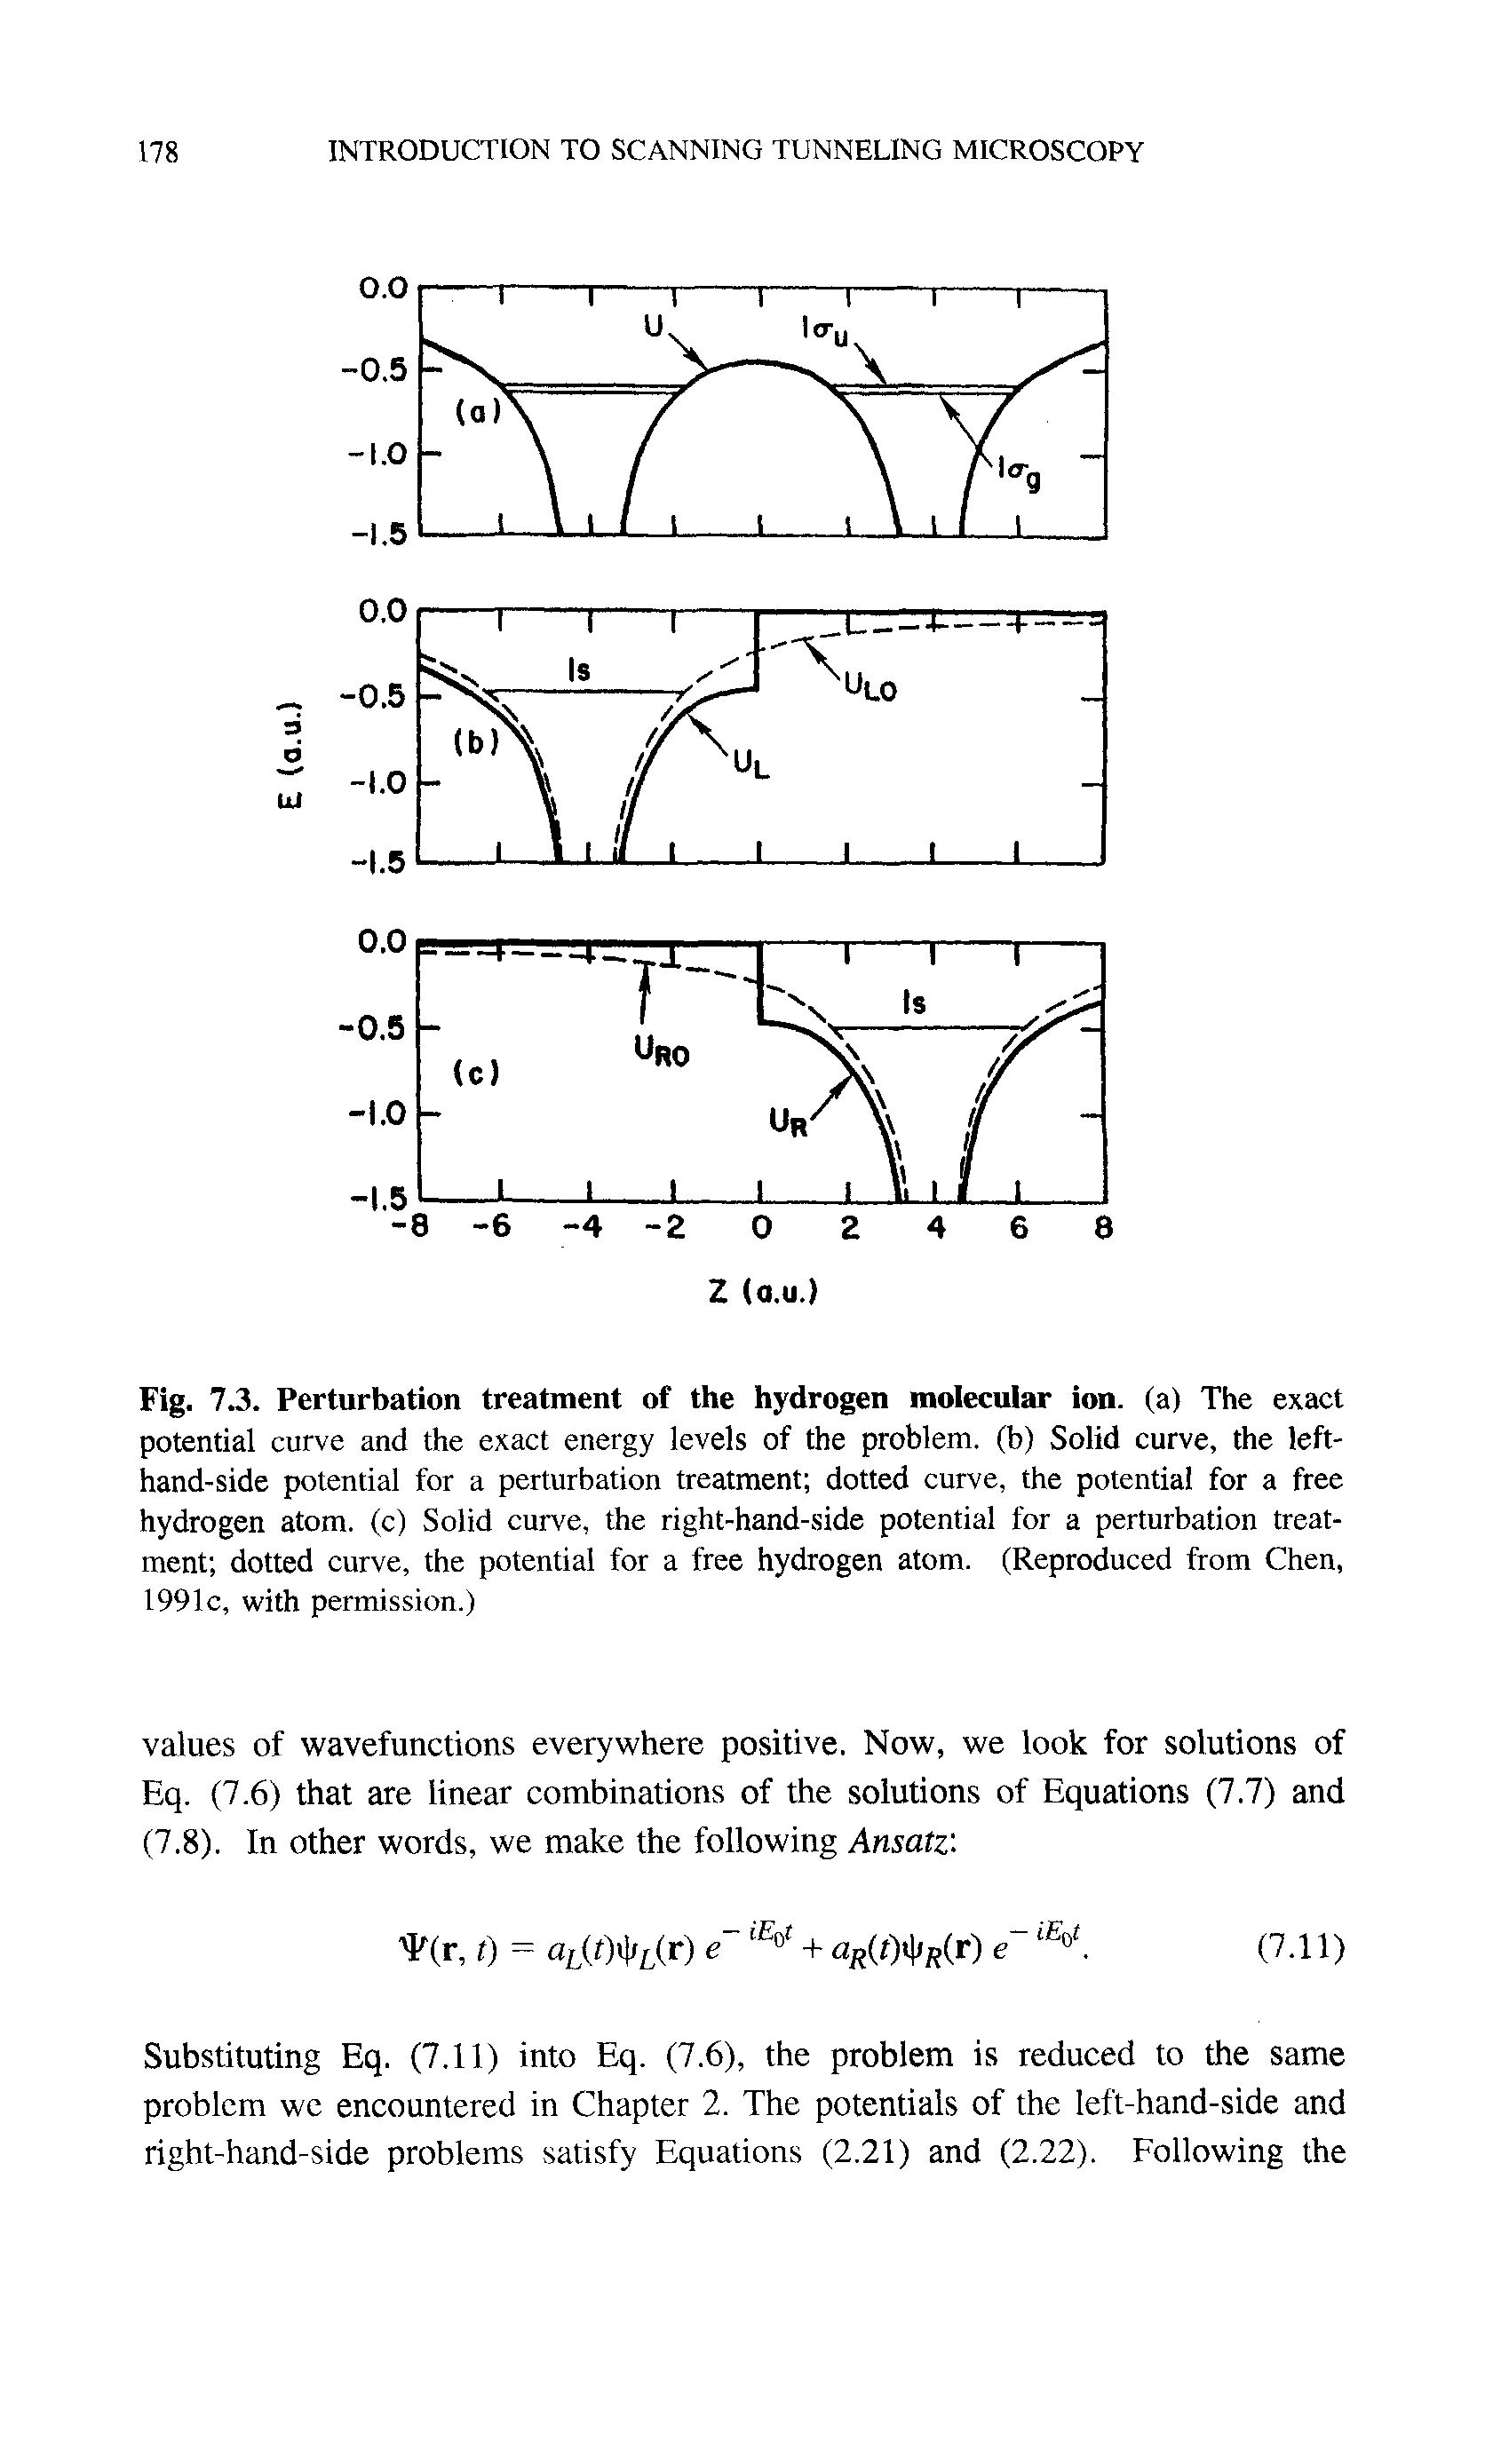 Fig. 7.3. Perturbation treatment of the hydrogen molecular ion. (a) The exact potential curve and the exact energy levels of the problem, (b) Solid curve, the left-hand-side potential for a perturbation treatment dotted curve, the potential for a free hydrogen atom, (c) Solid curve, the right-hand-side potential for a perturbation treatment dotted curve, the potential for a free hydrogen atom. (Reproduced from Chen, 1991c, with permission.)...